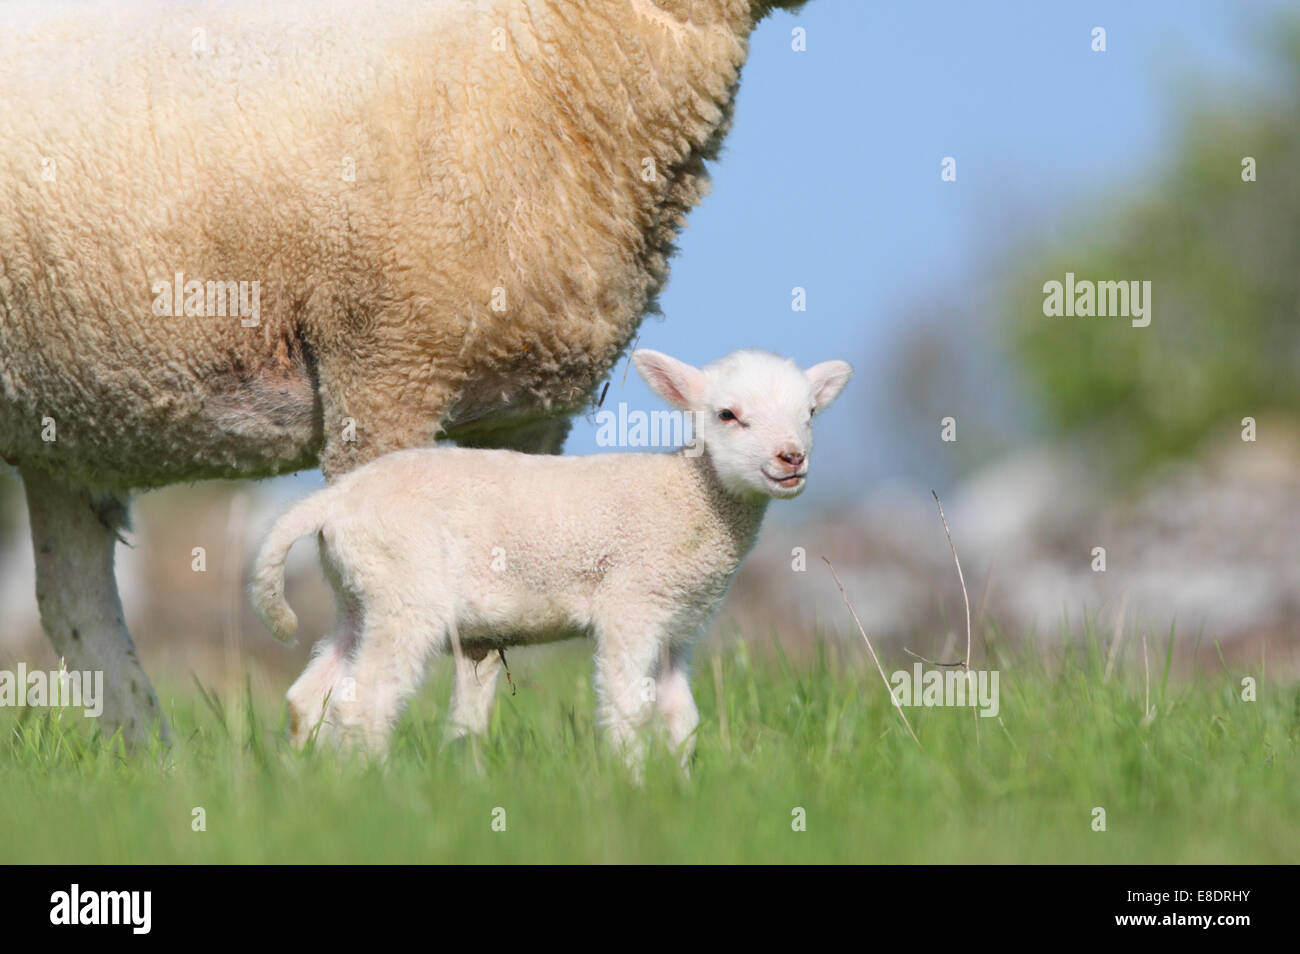 Newborn baby sheep standing in front of his mother, Estonia Stock Photo